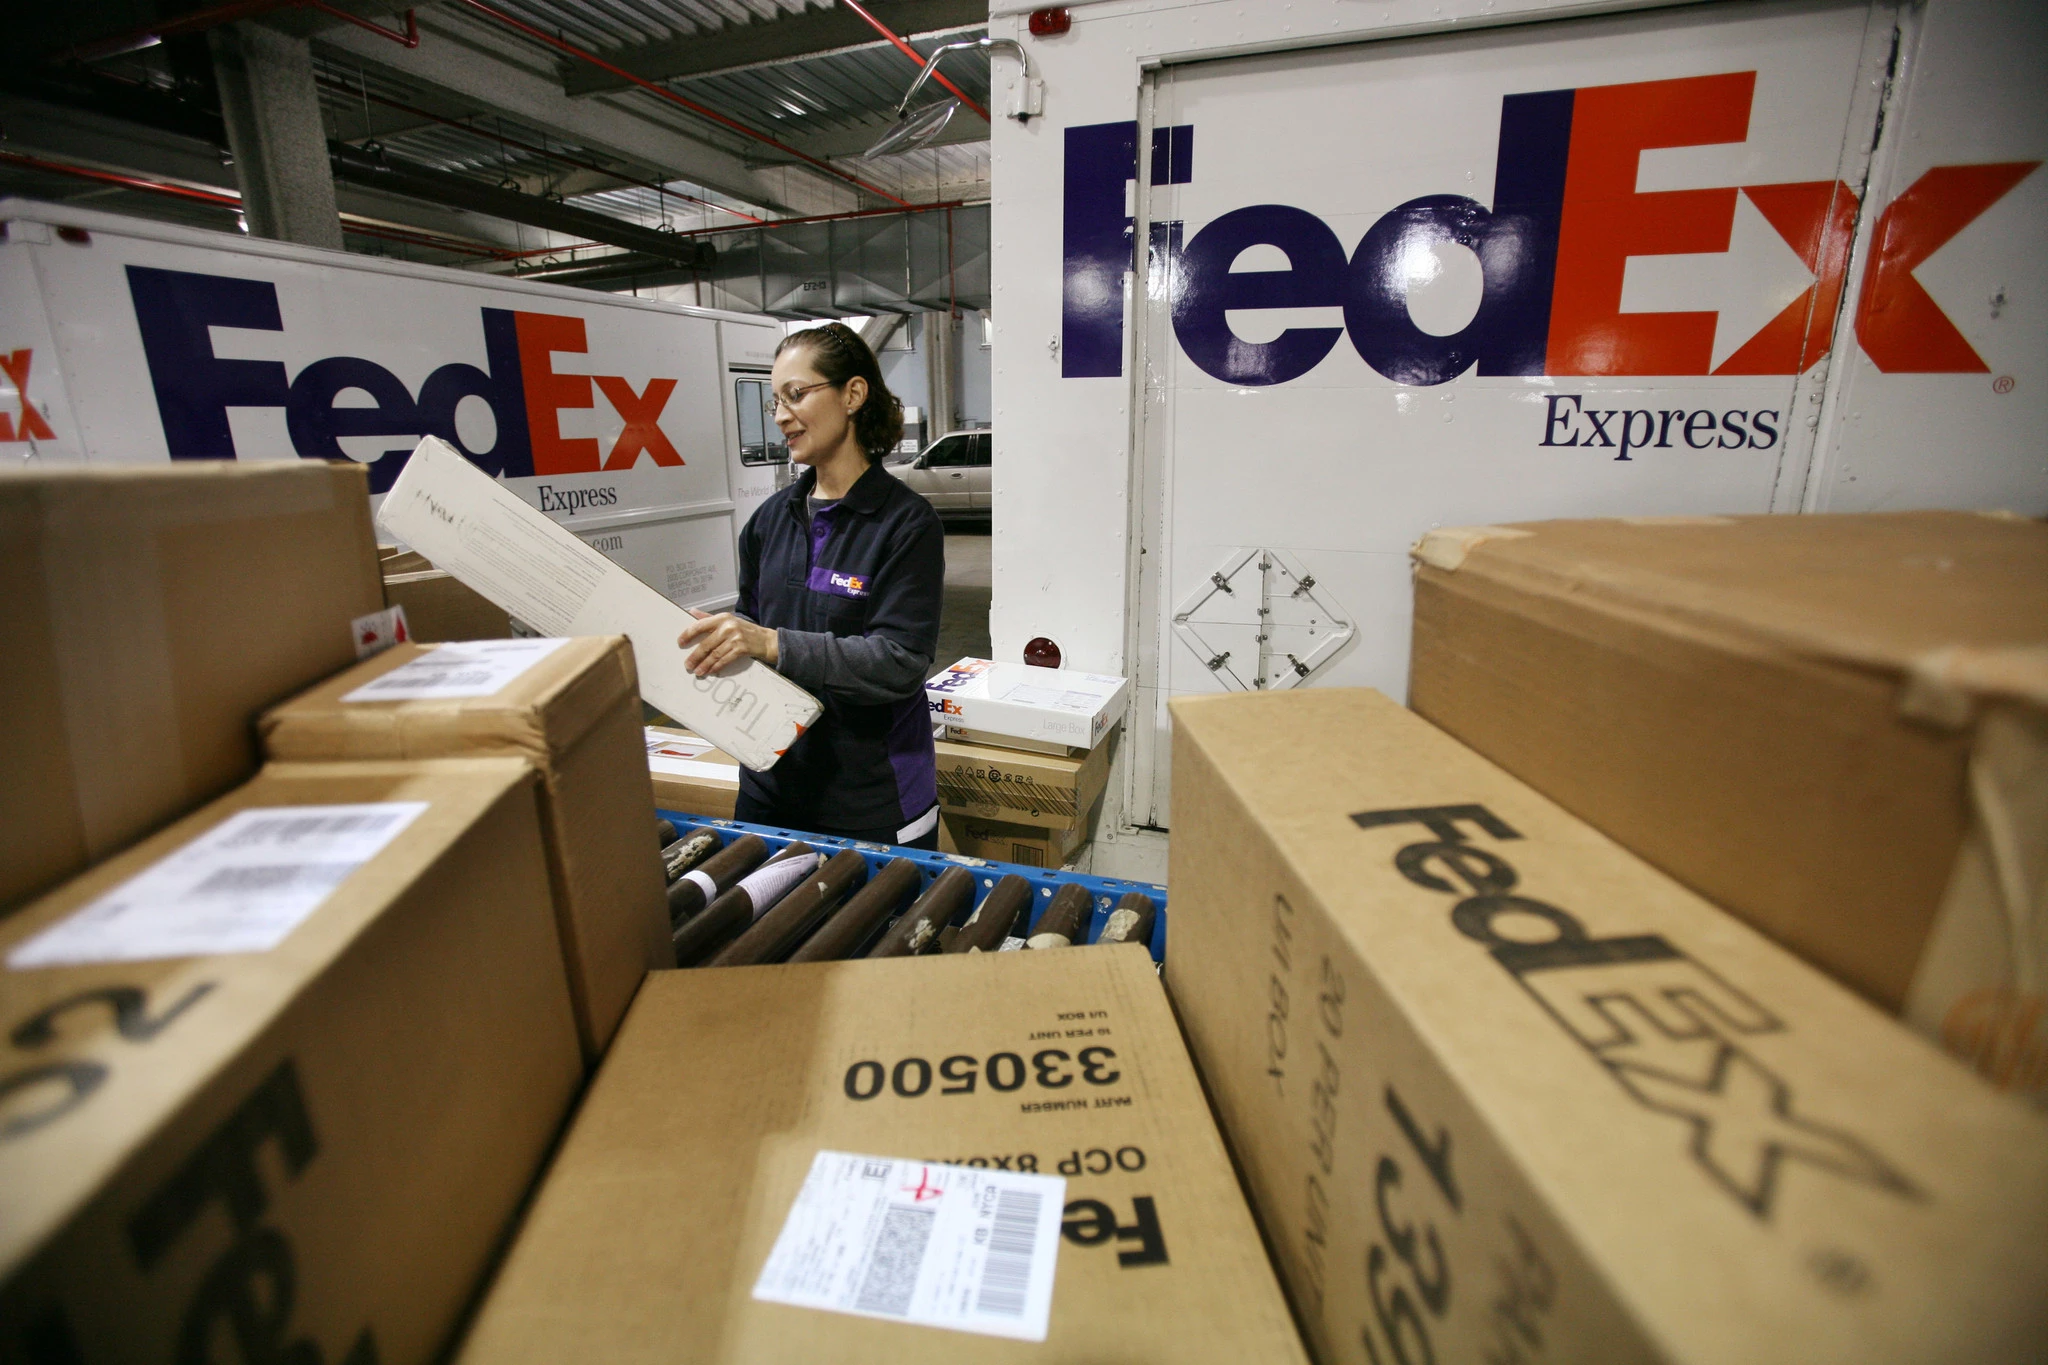 Is FedEx Home Delivery Reliable?